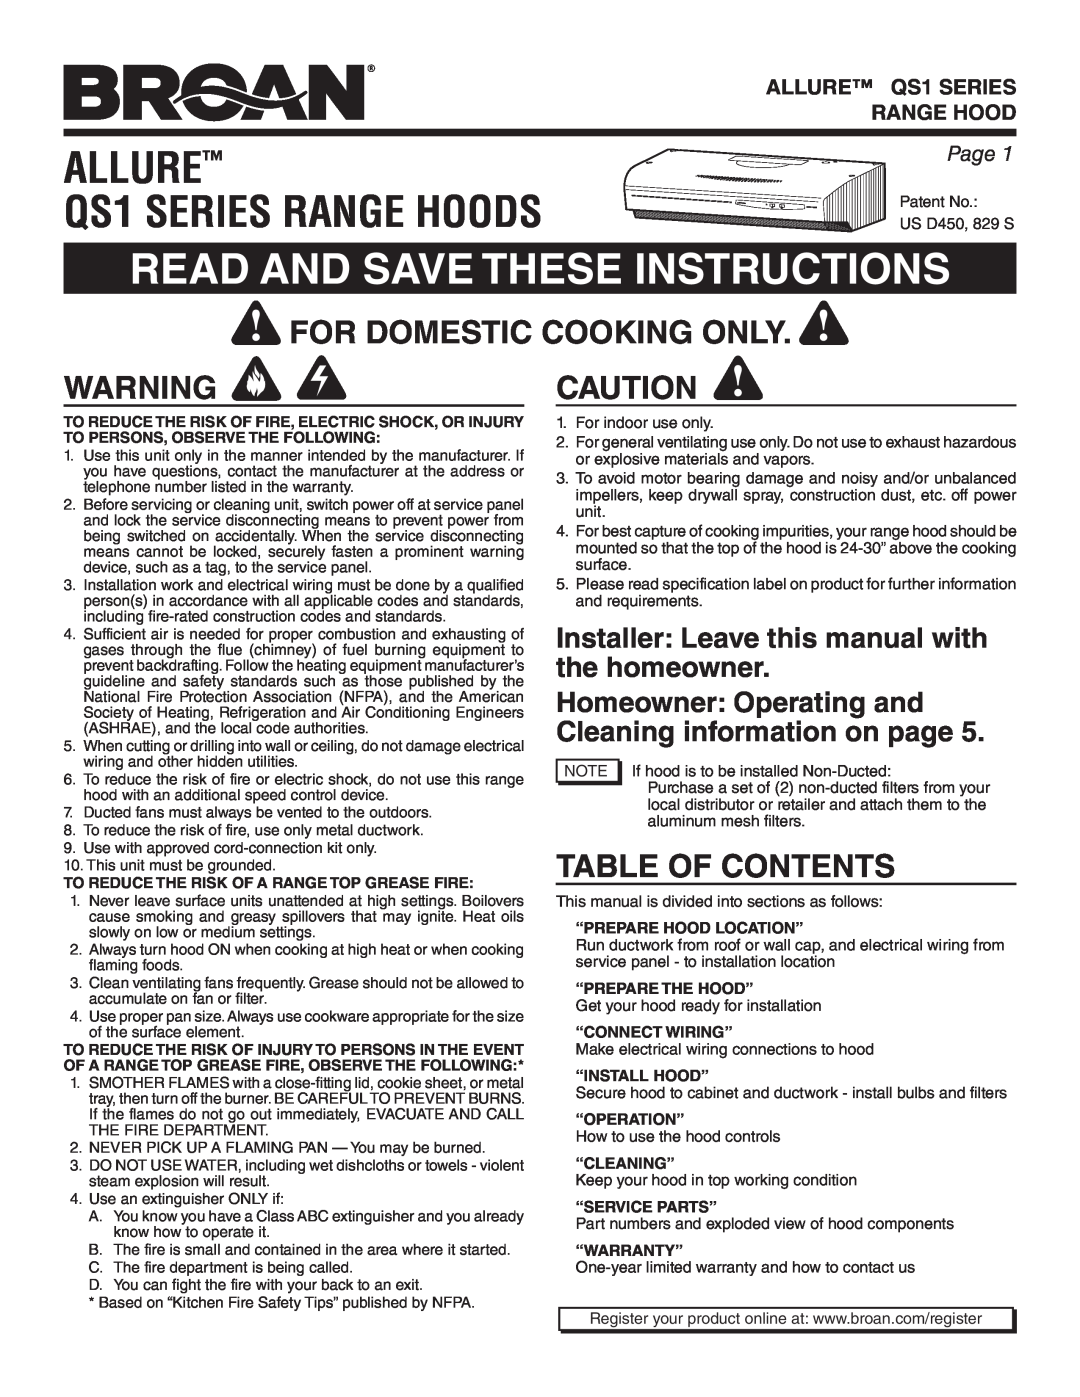 Broan QS130BL warranty Allure, QS1 SERIES RANGE HOODS, Read And Save These Instructions, For Domestic Cooking Only, Page 